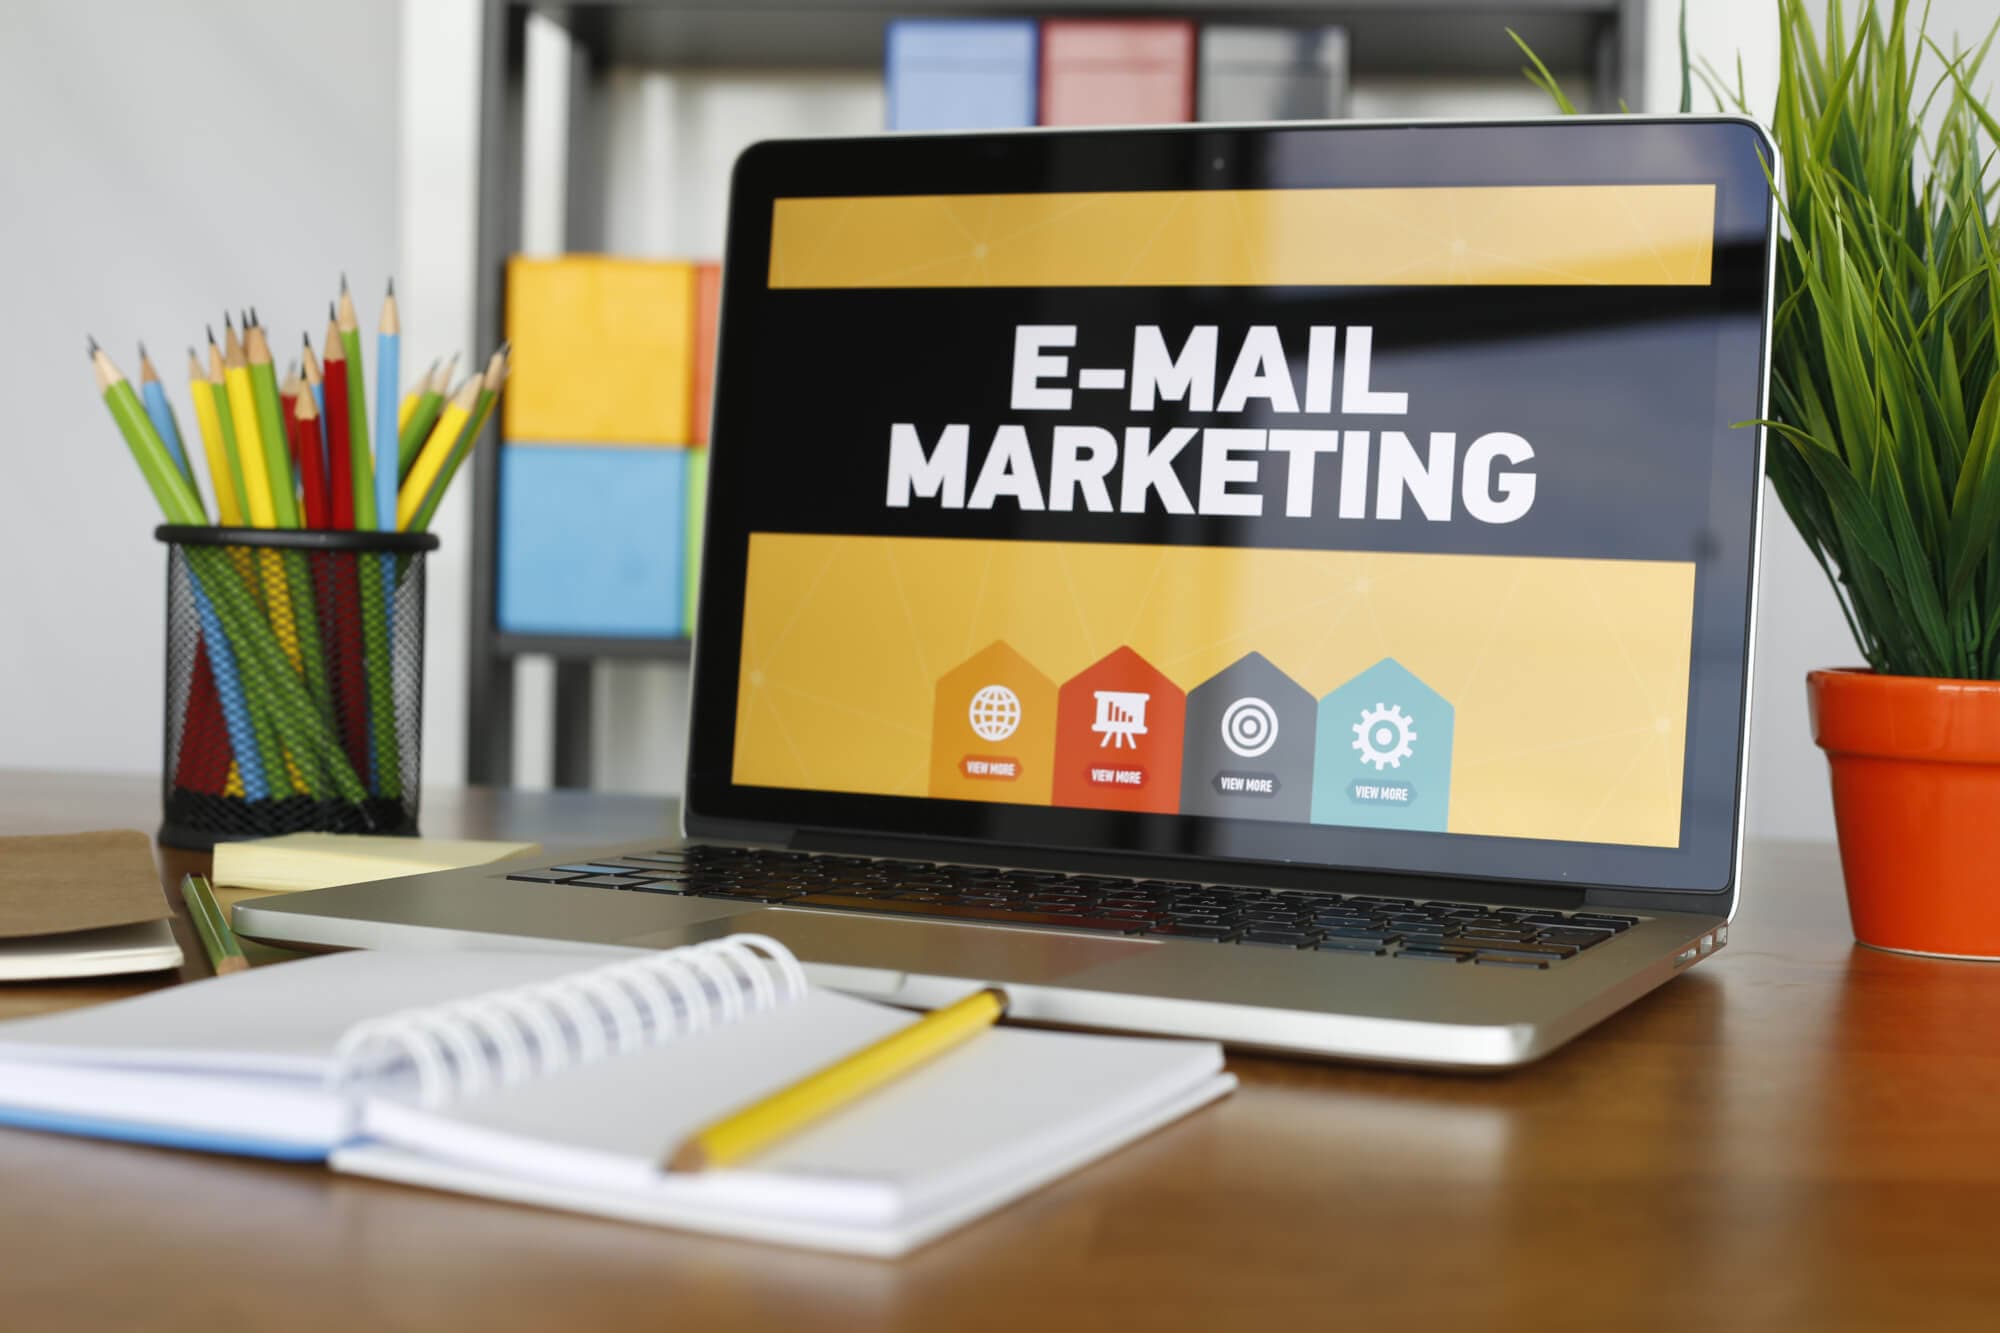 chien dich email marketing 1